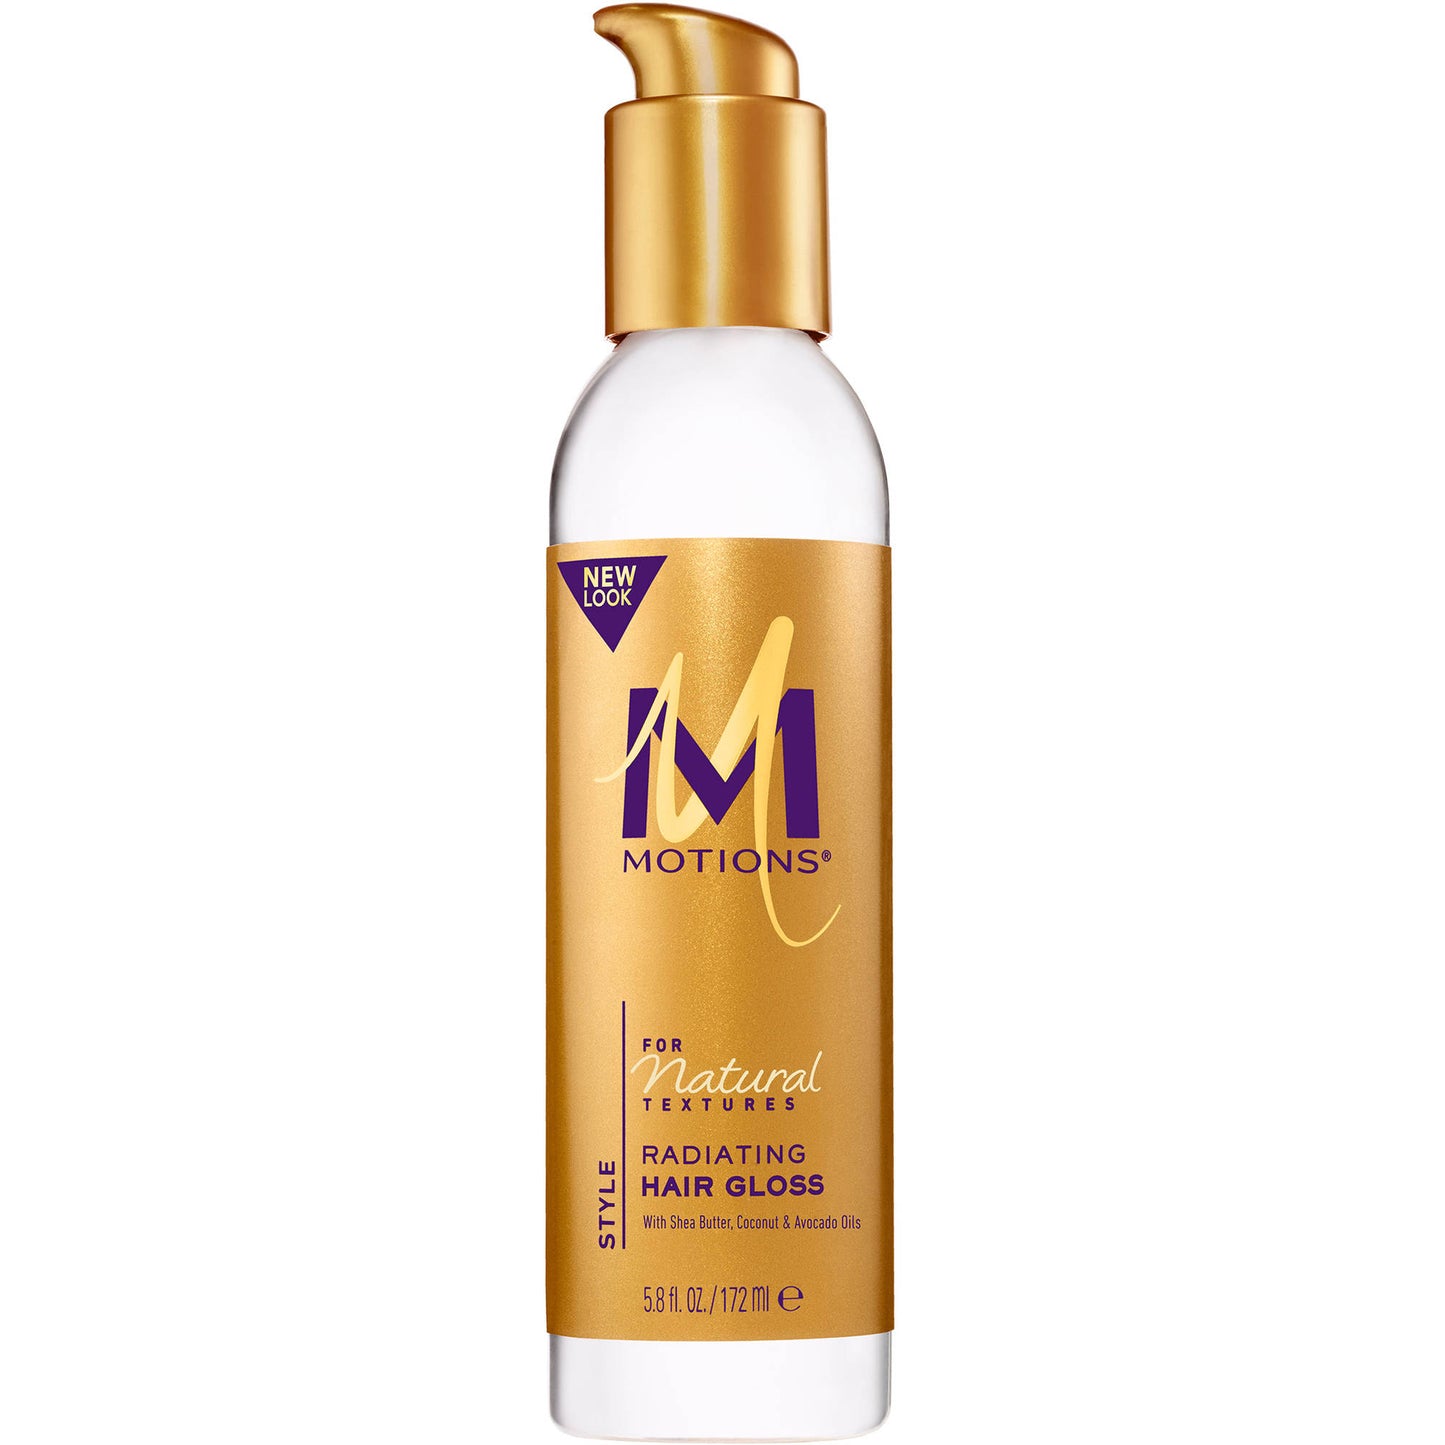  Motions For Natural Textures Radiating Hair gloss 5.8 Oz